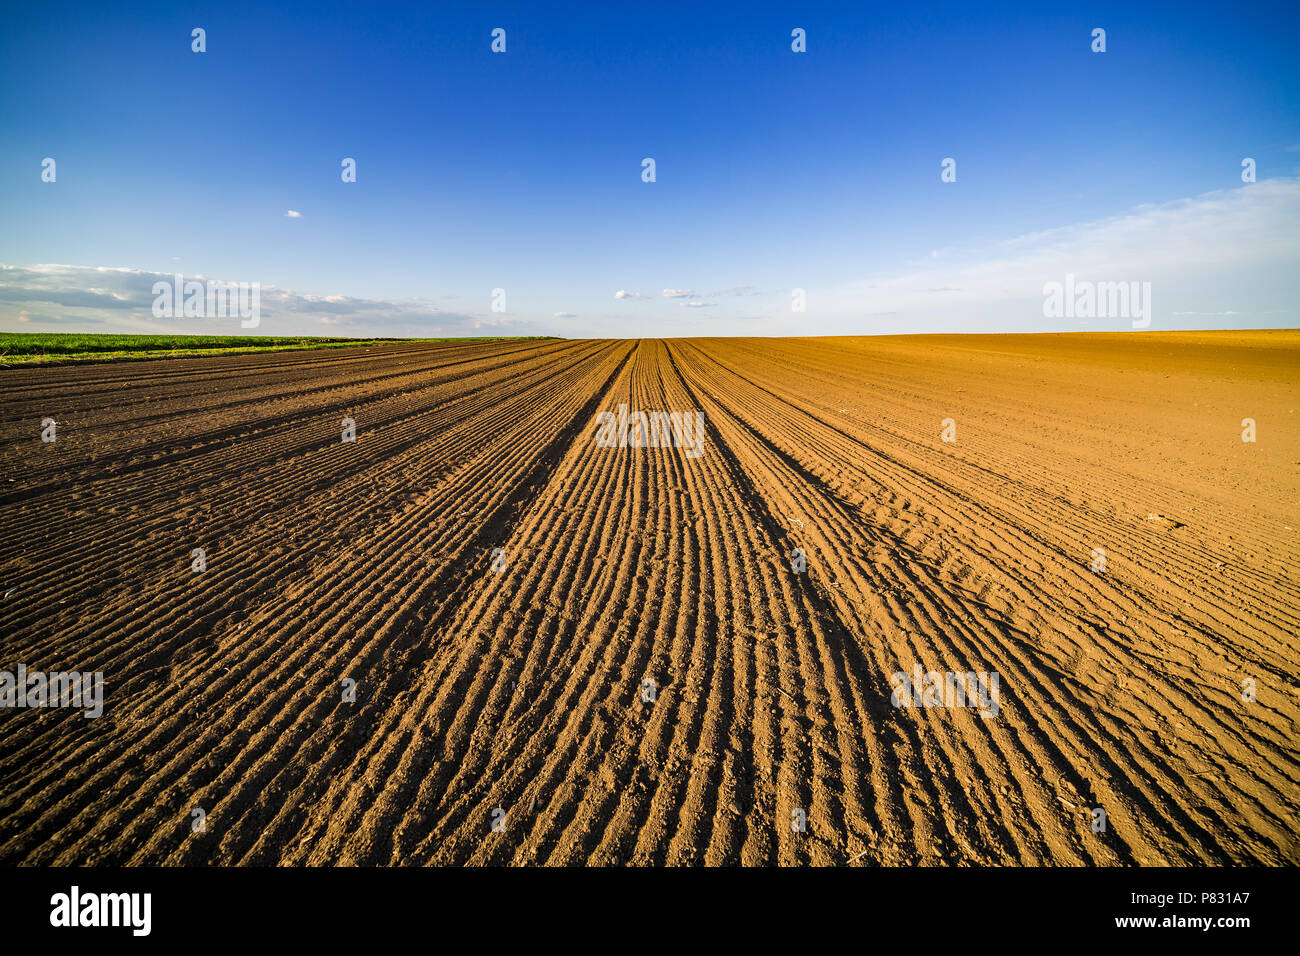 Agricultural landscape, arable crop field. Arable land is the land under temporary agricultural crops capable of being ploughed and used to grow crops Stock Photo